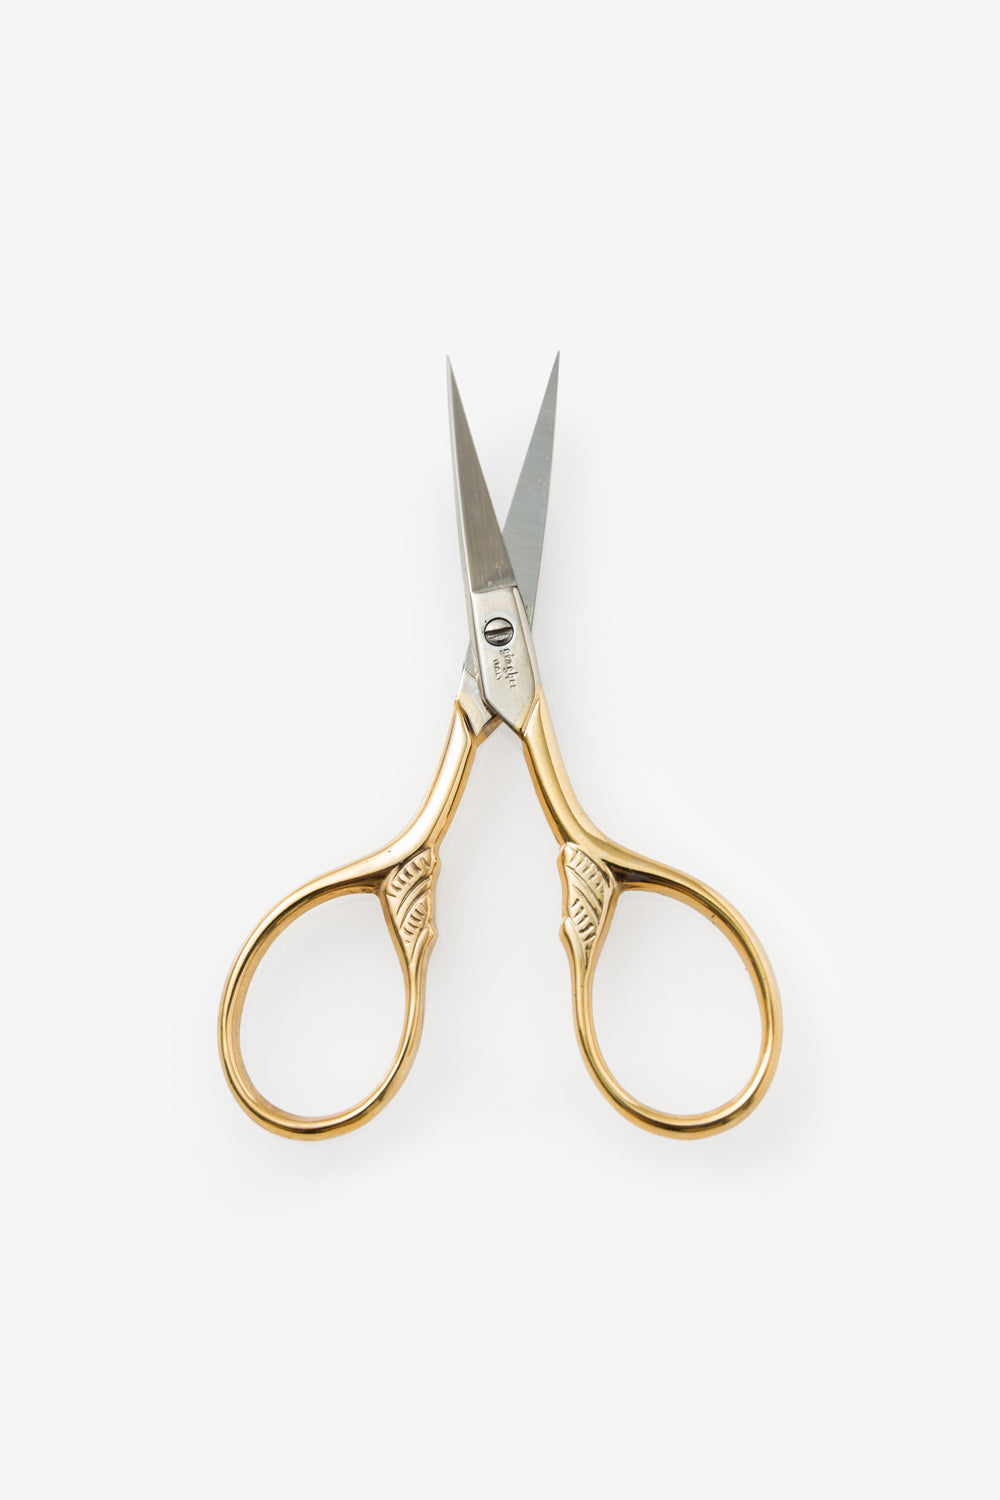 Gingher Lion's Tail Embroidery Scissors with Gold Handles.